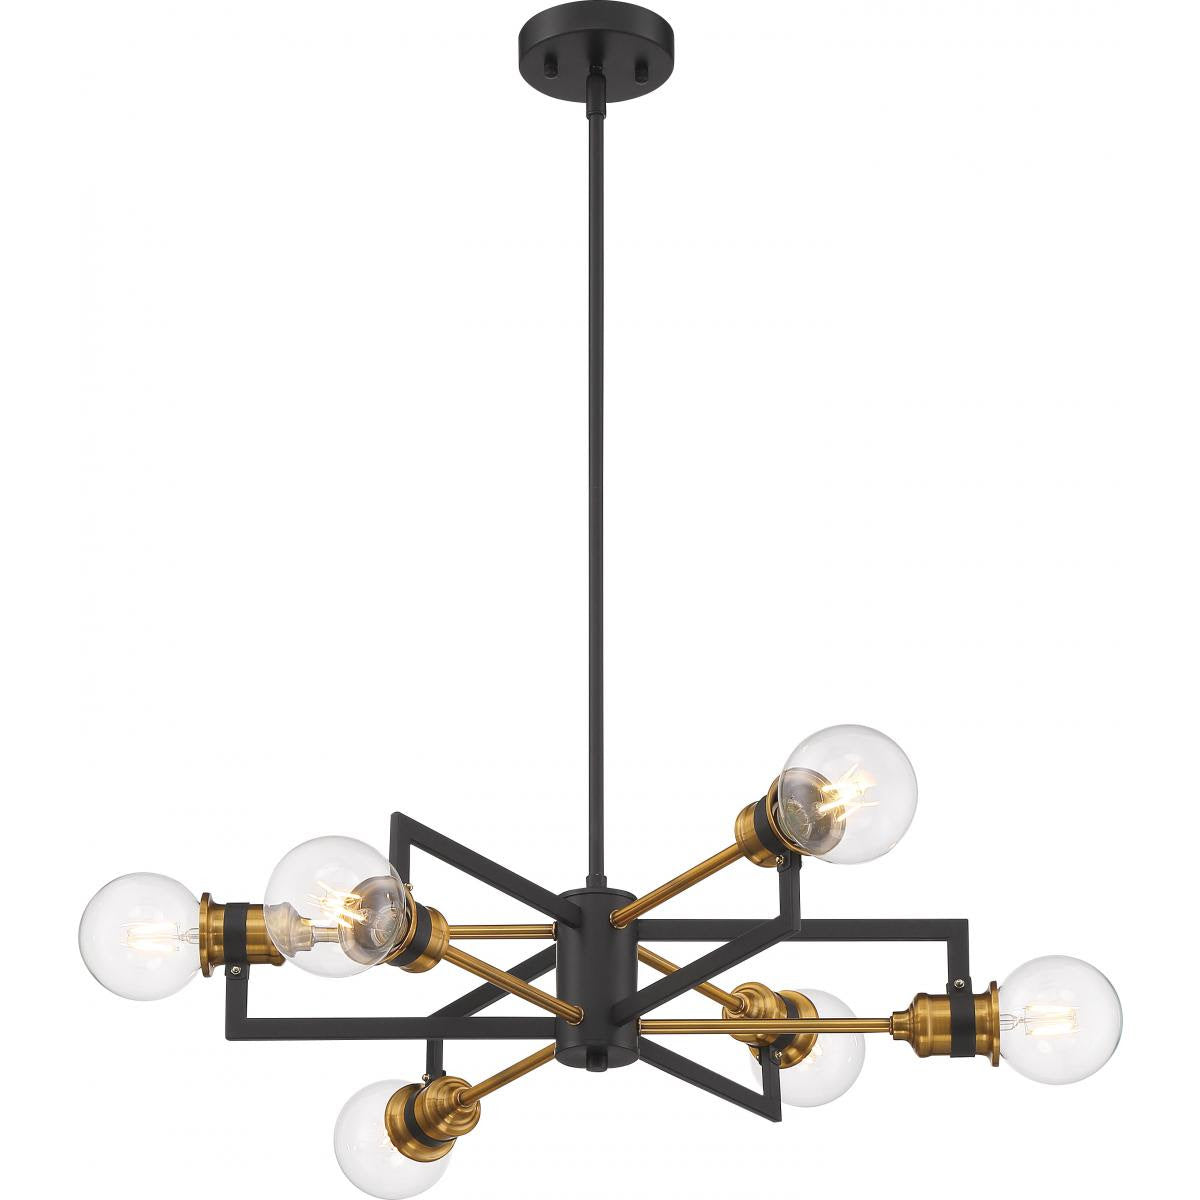 Nuvo Lighting Intention 6 Light Chandelier - Warm Brass and Black Finish